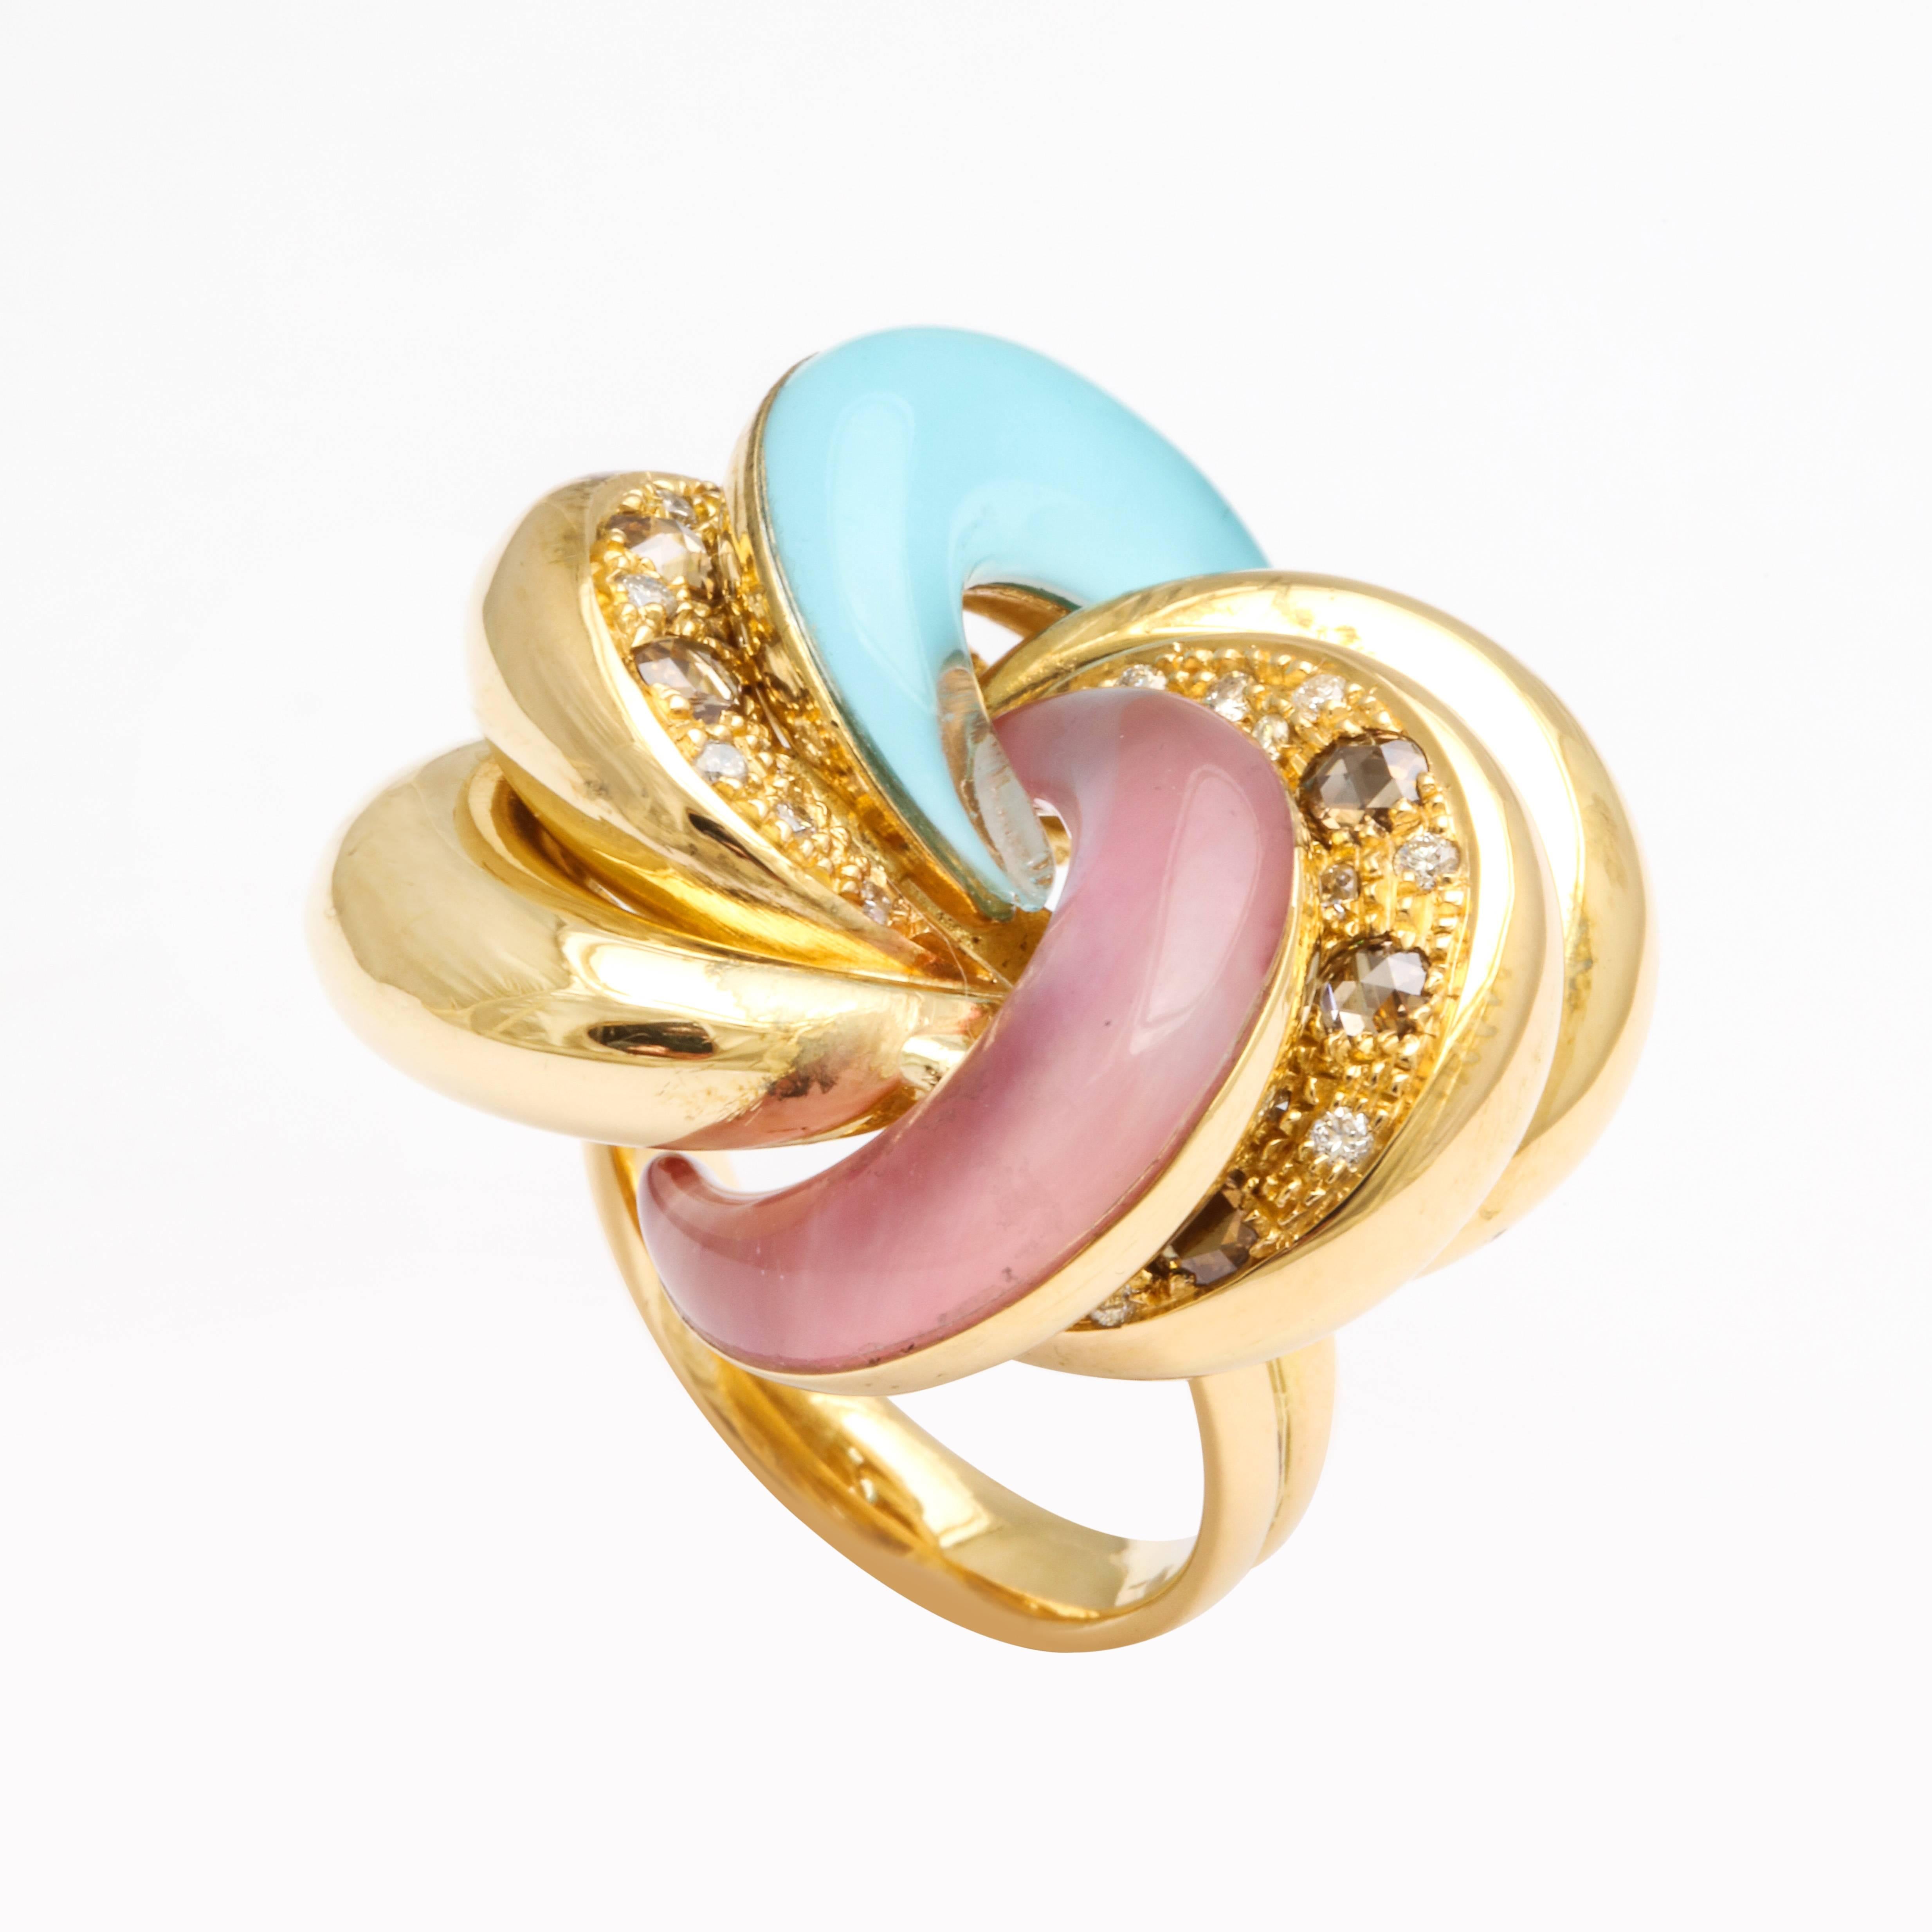 Faraone Mennella Roselline Rose Quartz Turquoise Yellow Gold Ring In New Condition For Sale In New York, NY